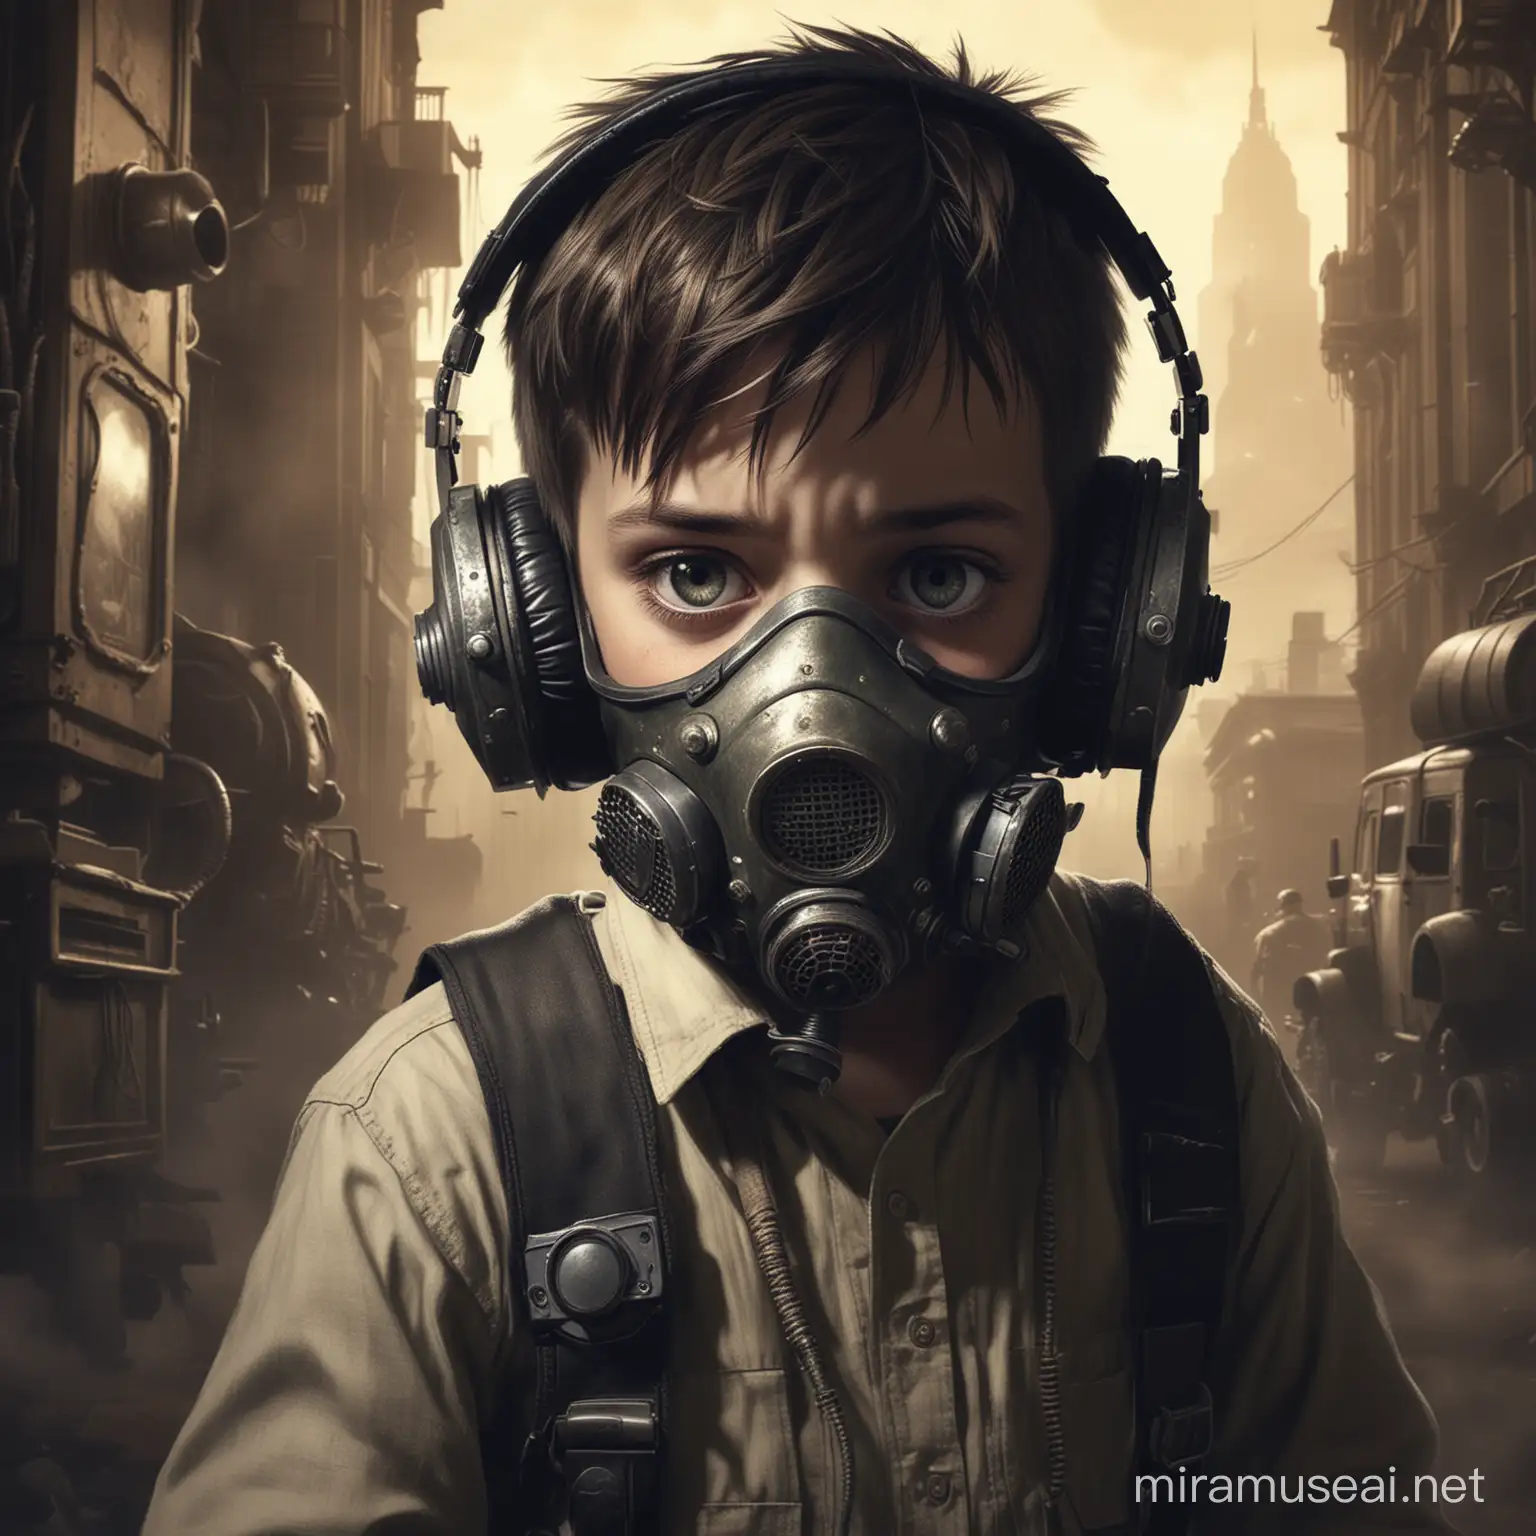 Little boy, with cd player, listening to heavy metal music, wearing headphons and gas mask, post apocalyptic, shaddows, deep, high detailed, art deco, poster, noir, dark athmosphere, very hight detail, art deco style, bioshock game style, deep surroundings, sadness, dark shadows, dramatic scene, ultra realistic